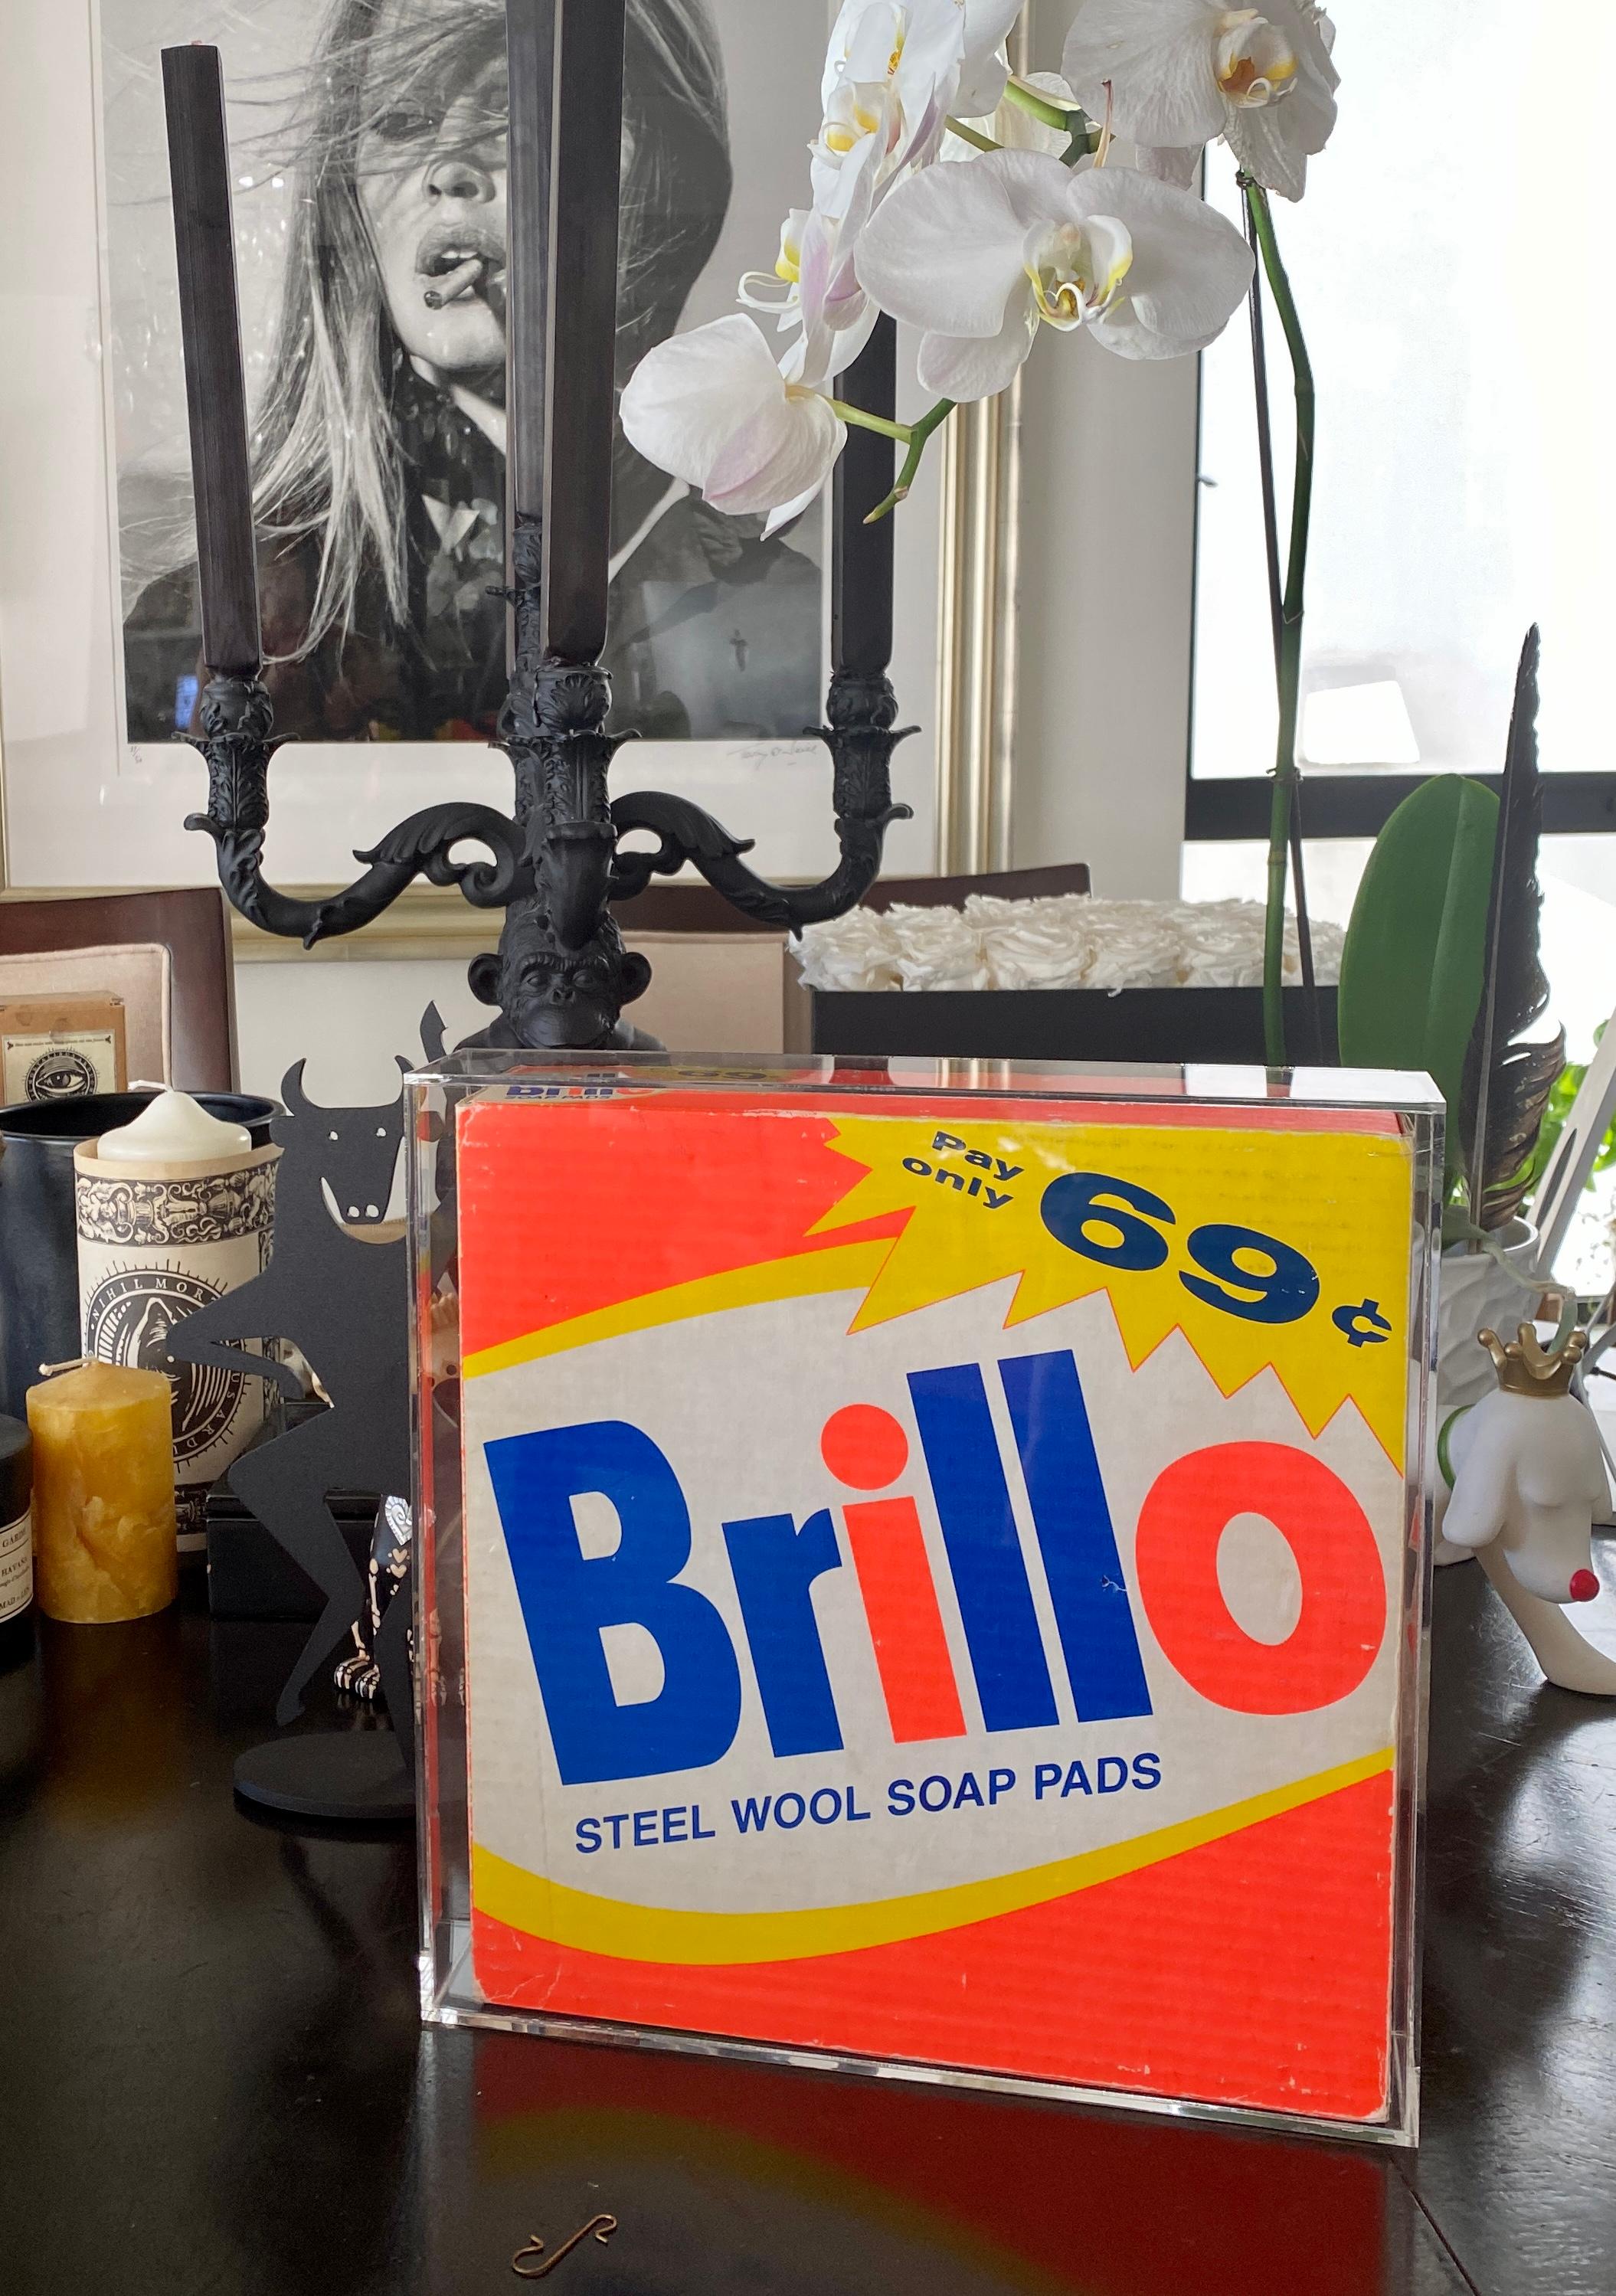 
This is your chance to own an extremely rare, original Warhol Brillo Box. In 1988, Ronny van de Velde put on a famous show of some of Andy Warhol’s most famous artworks at his gallery in Antwerp, Belgium. Ronny published the most amazing edition of